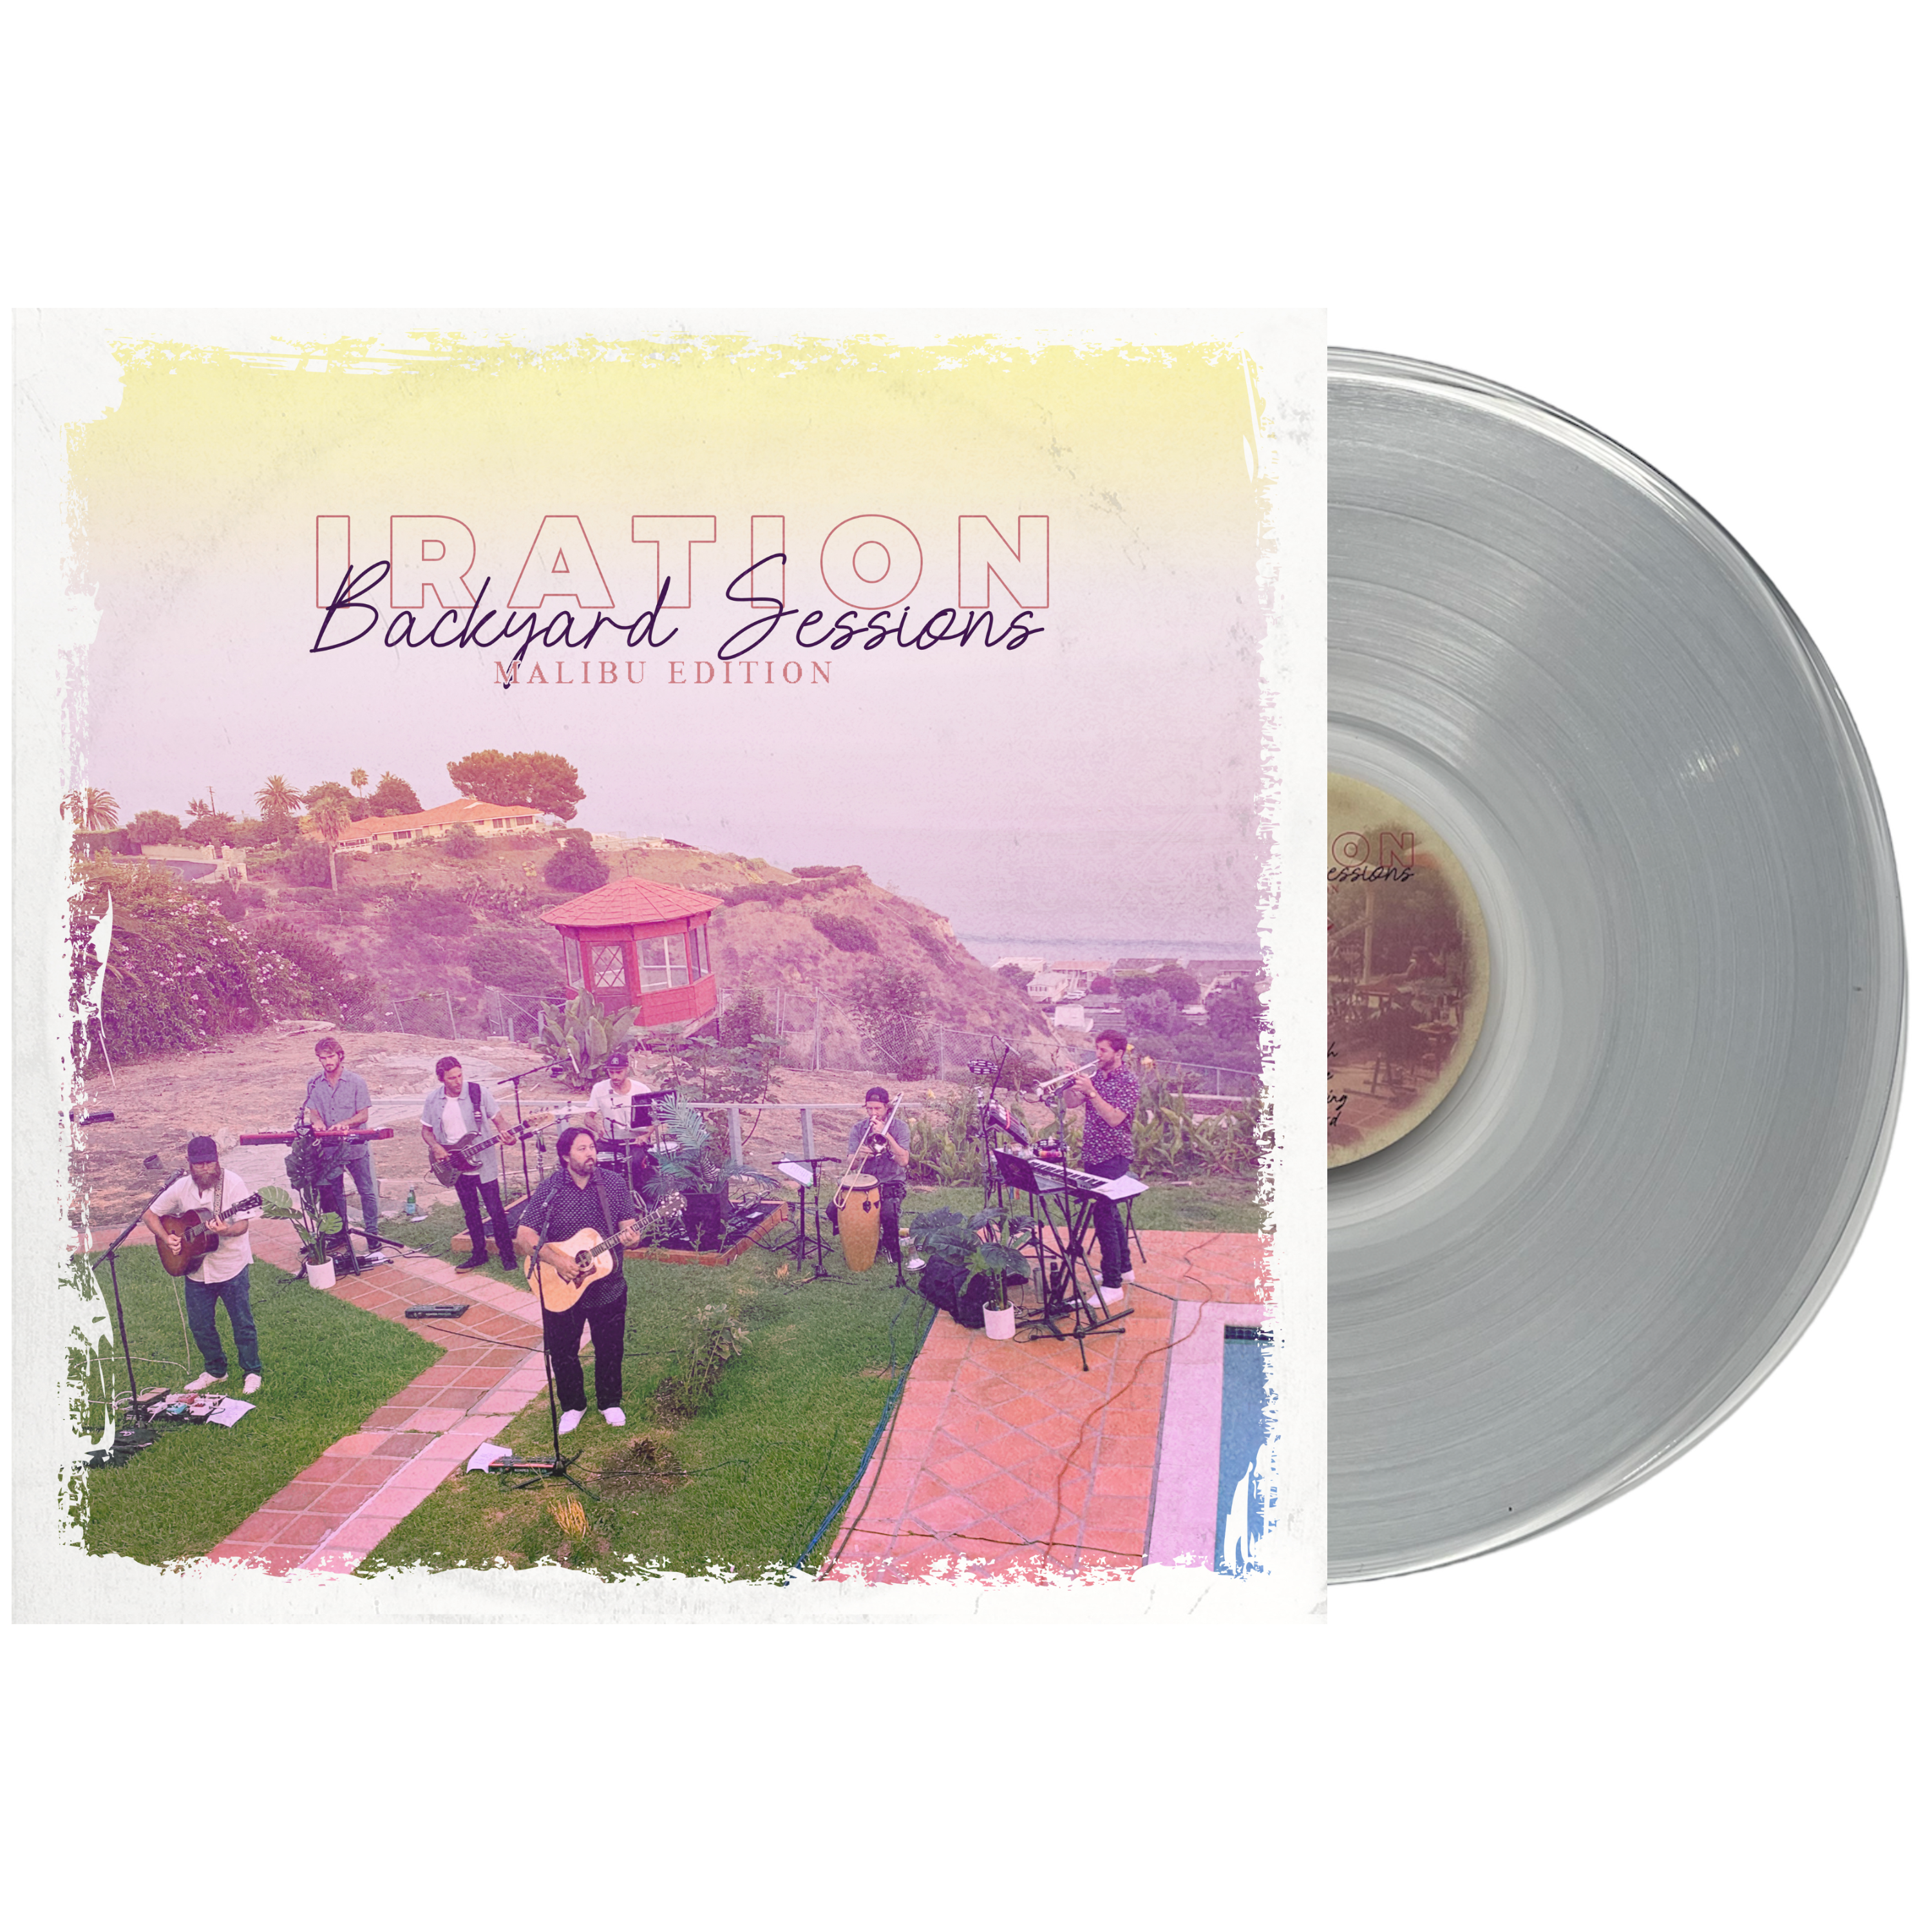 Backyard Sessions Vinyl Color Options – Iration | Official Store